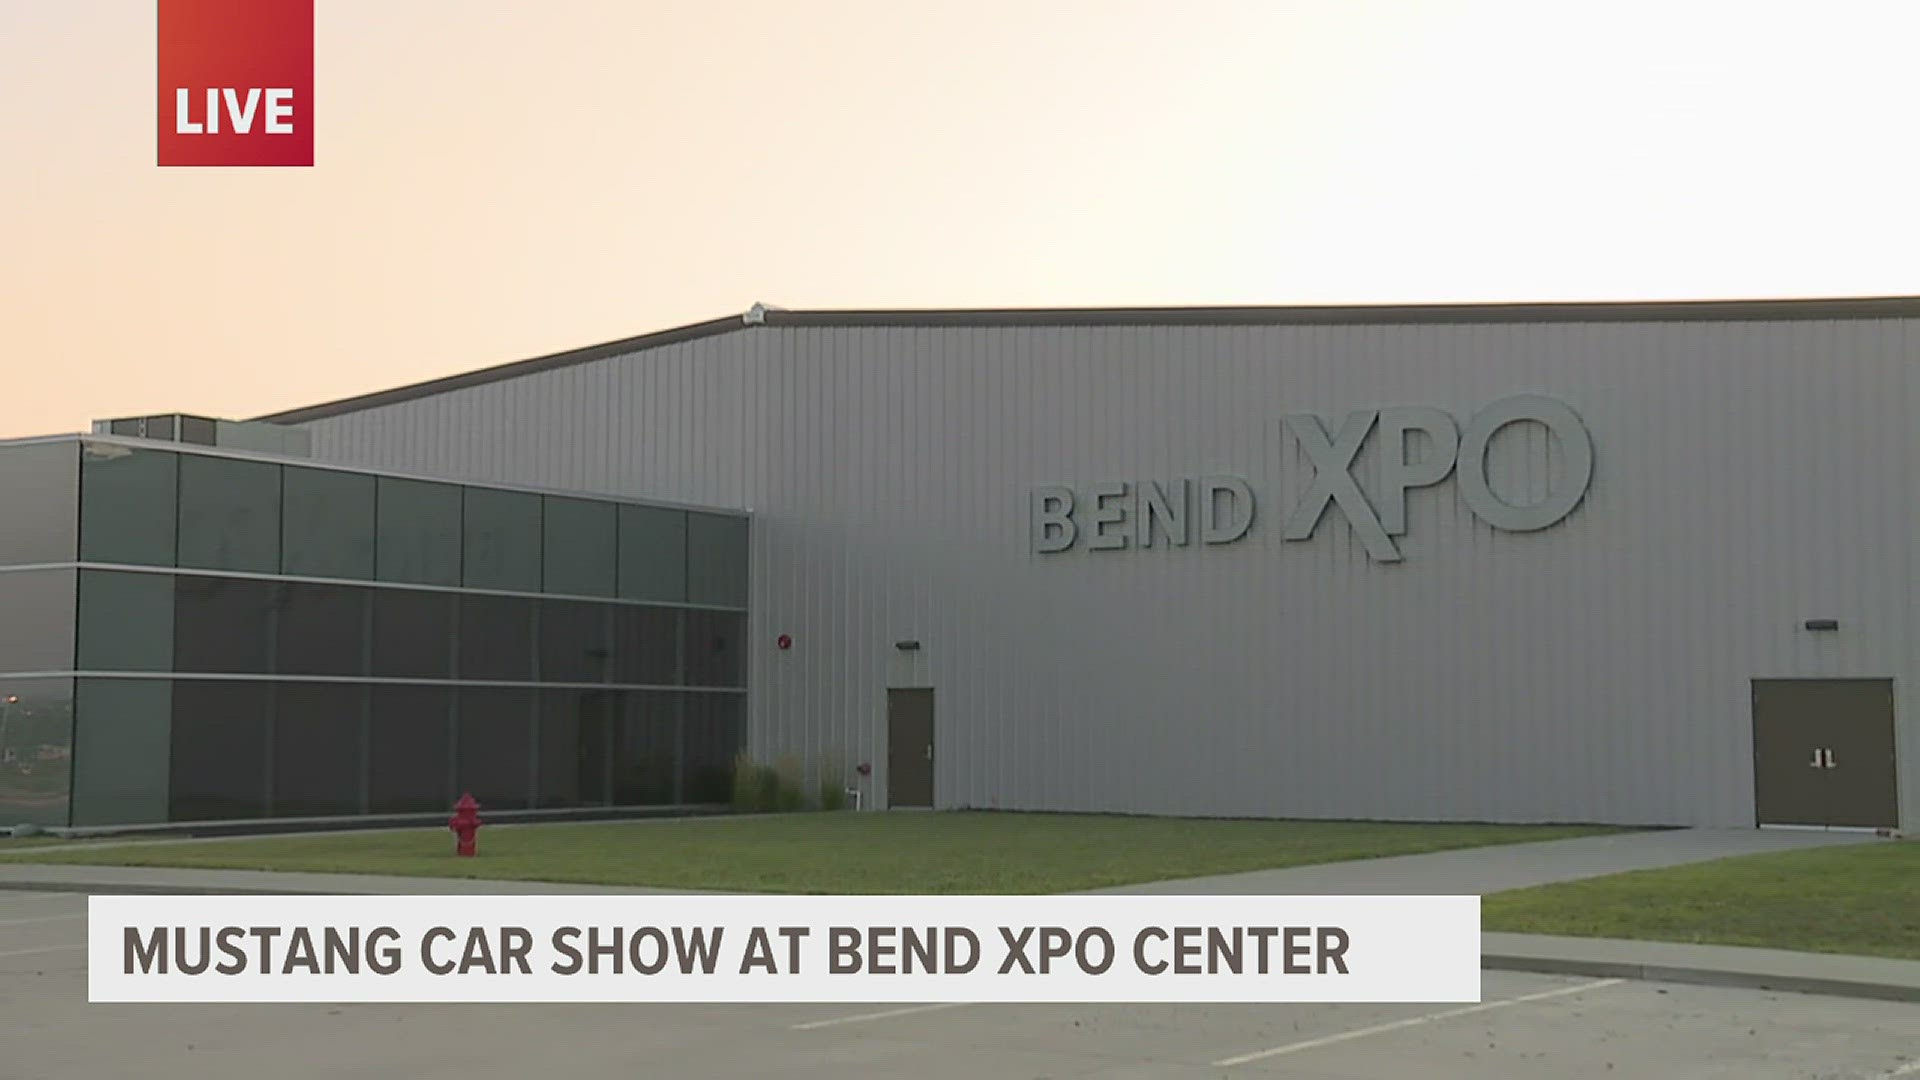 The Bend XPO Center in East Moline is holding the annual Mustang Car Show this week. Motor car enthusiasts can view over 100 cars from throughout history.